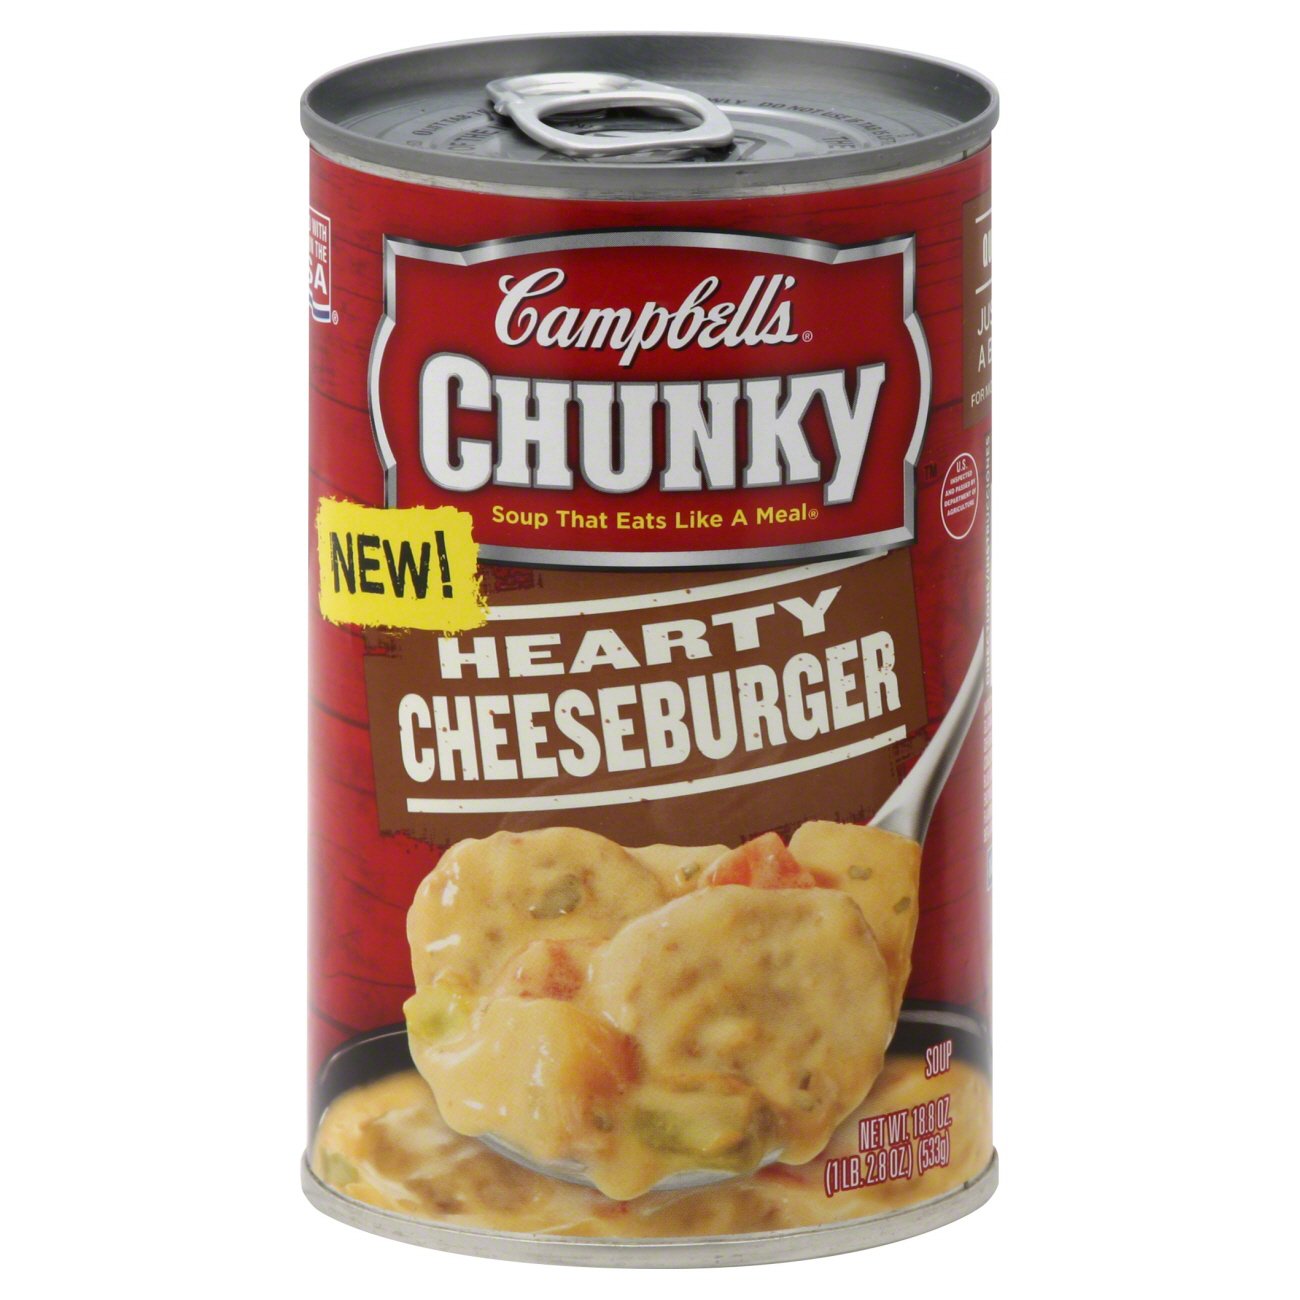 Campbell's Chunky Hearty Cheeseburger Soup - Shop Soups & Chili at H-E-B